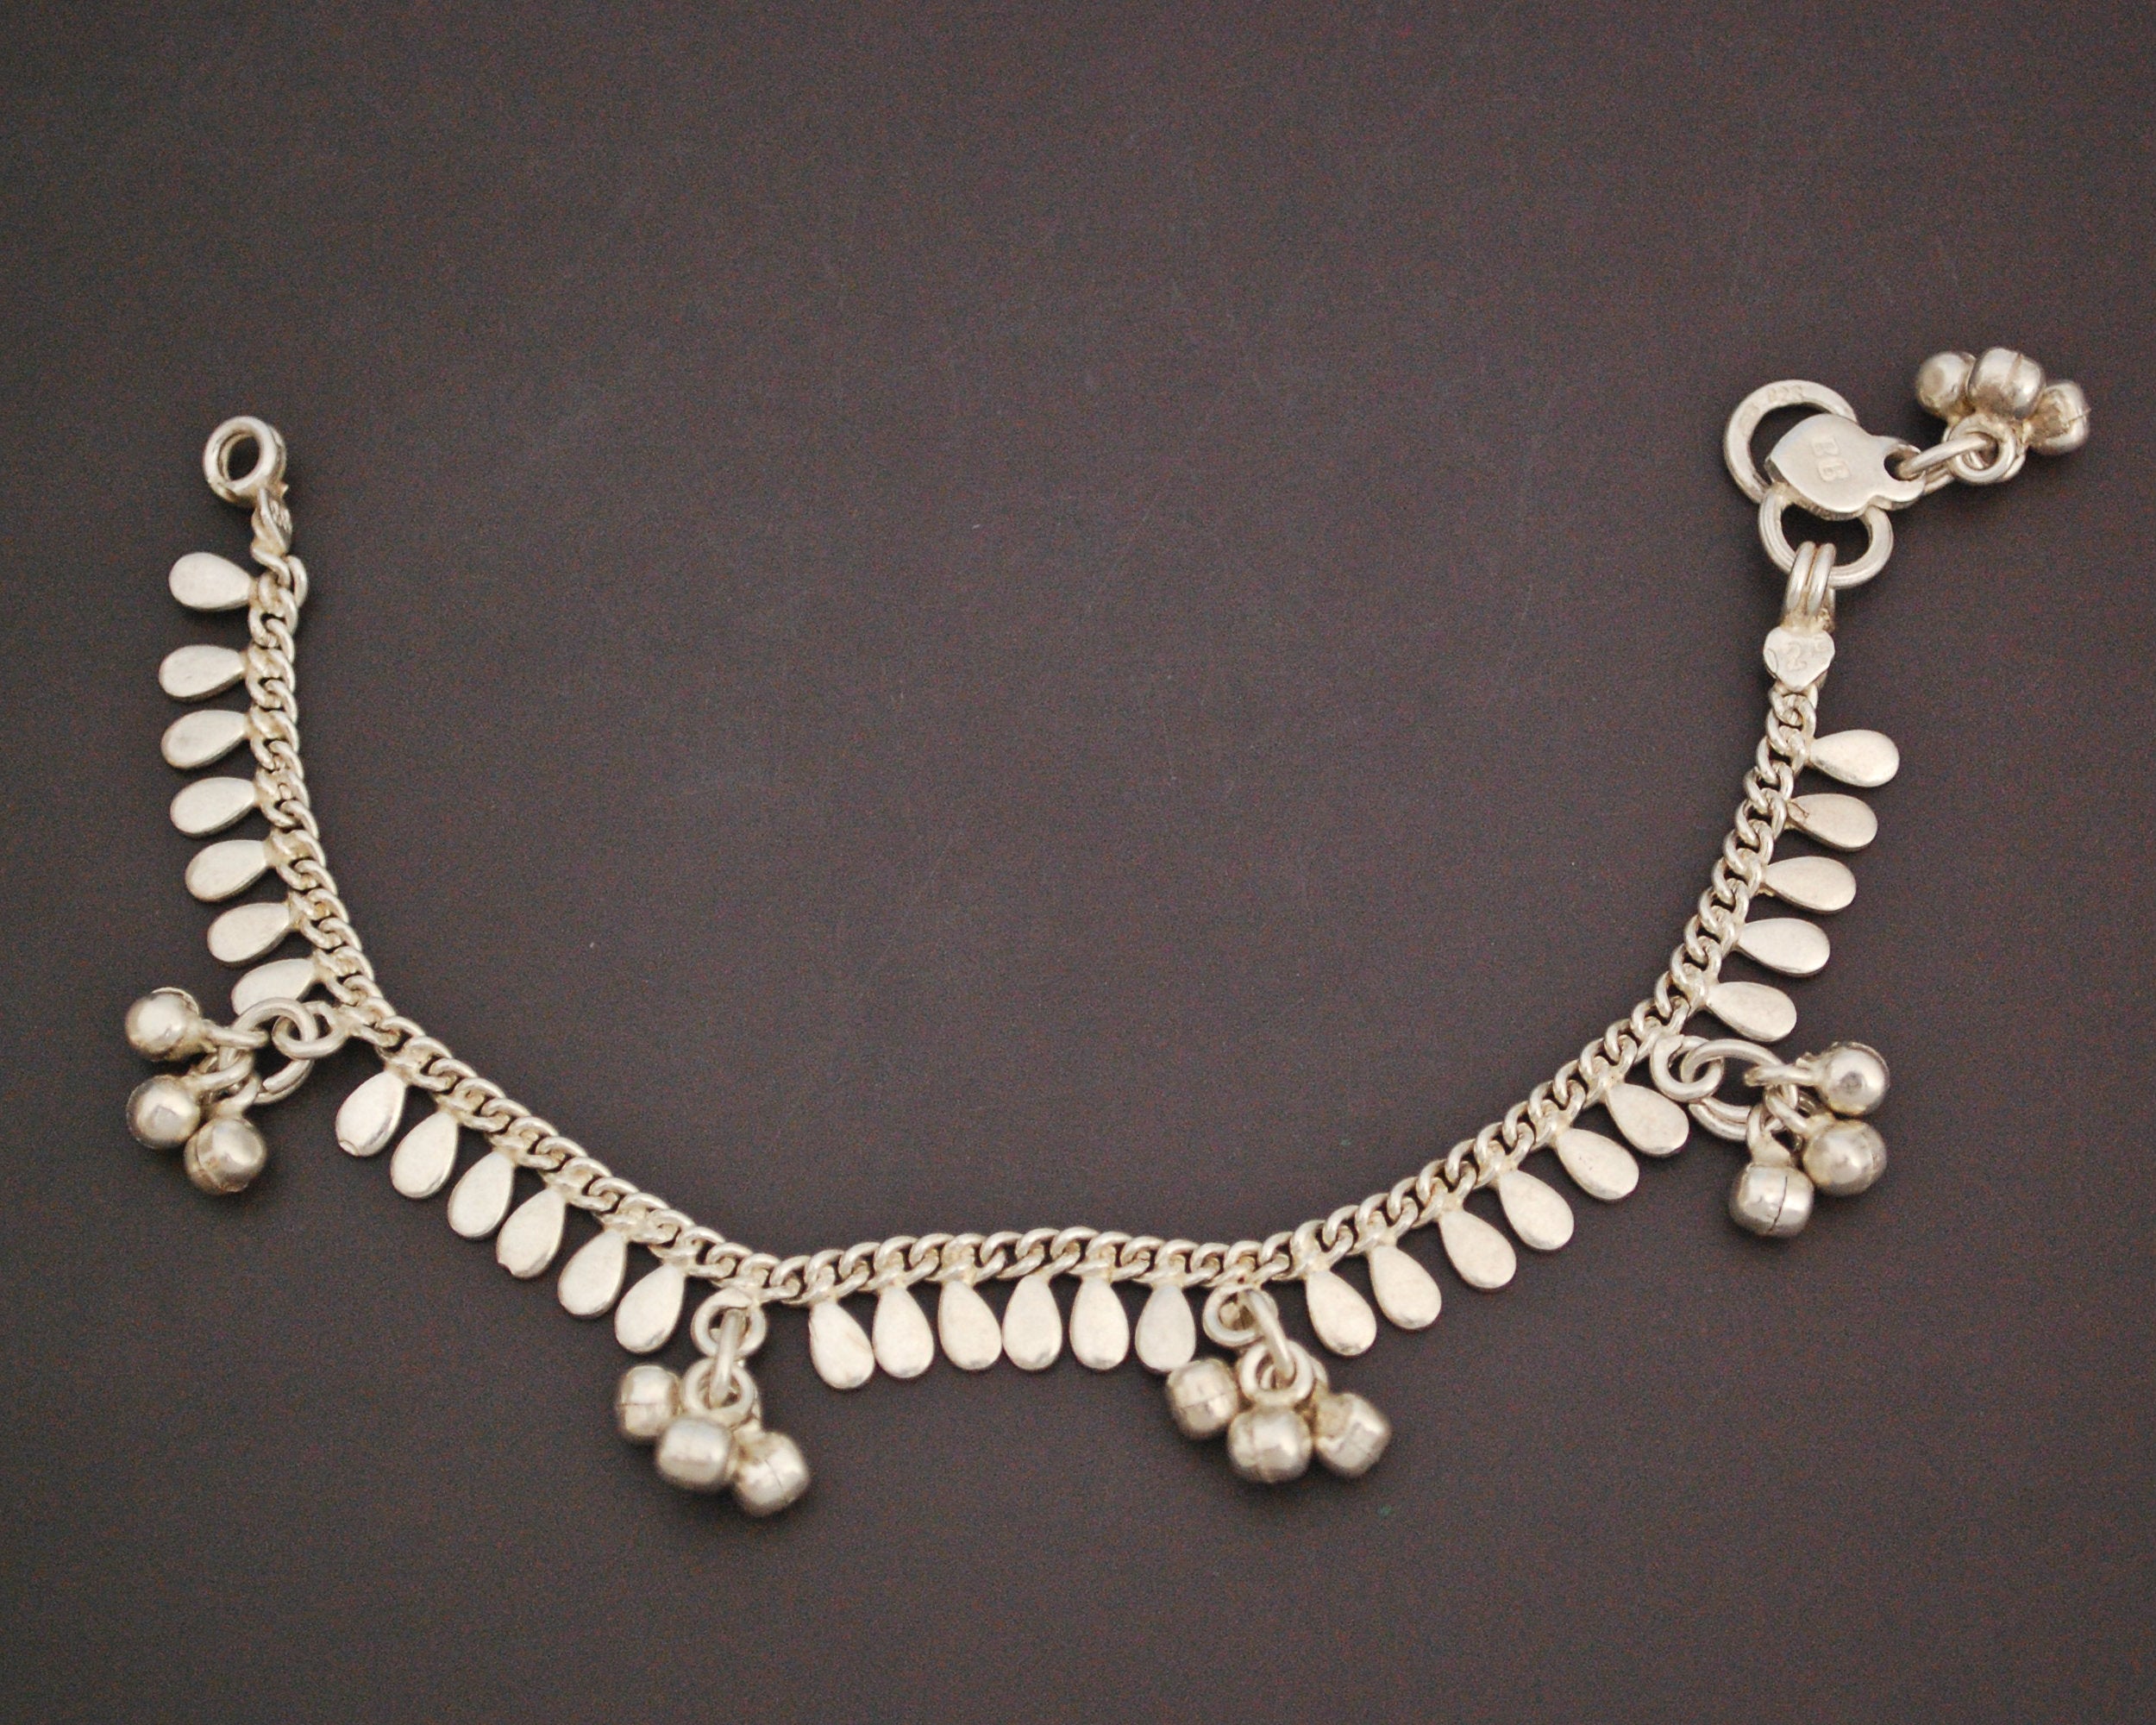 Rajasthani Silver Bracelet with Bells - SMALL